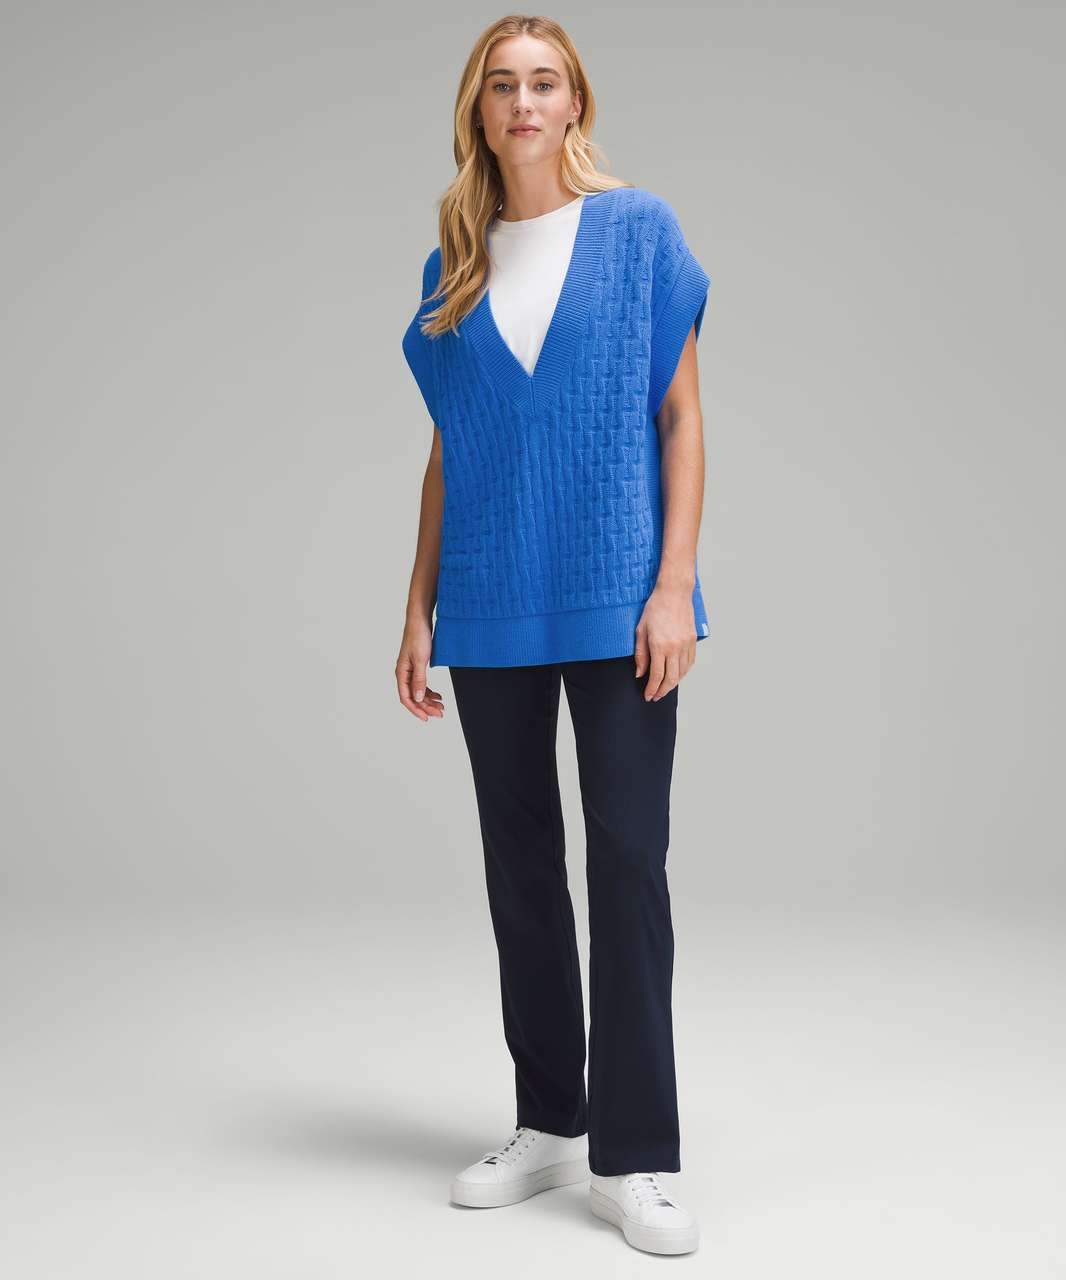 Lululemon Cable-Knit Relaxed-Fit Sweater Vest - Pipe Dream Blue